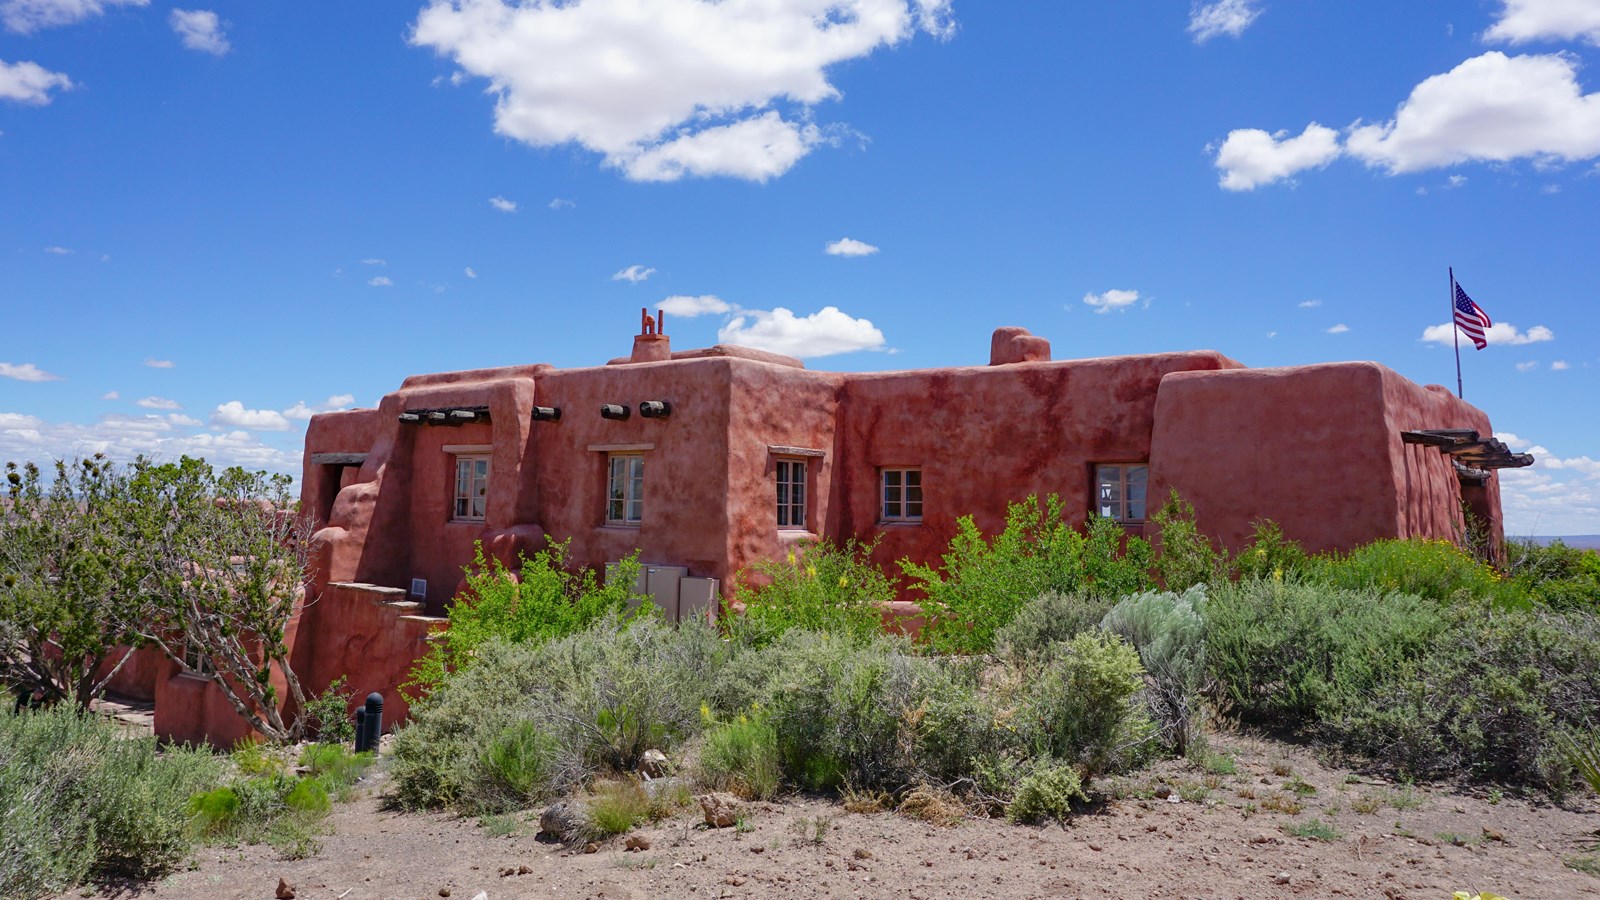 An orange adobe style building surrounded by grasses and shrubs.